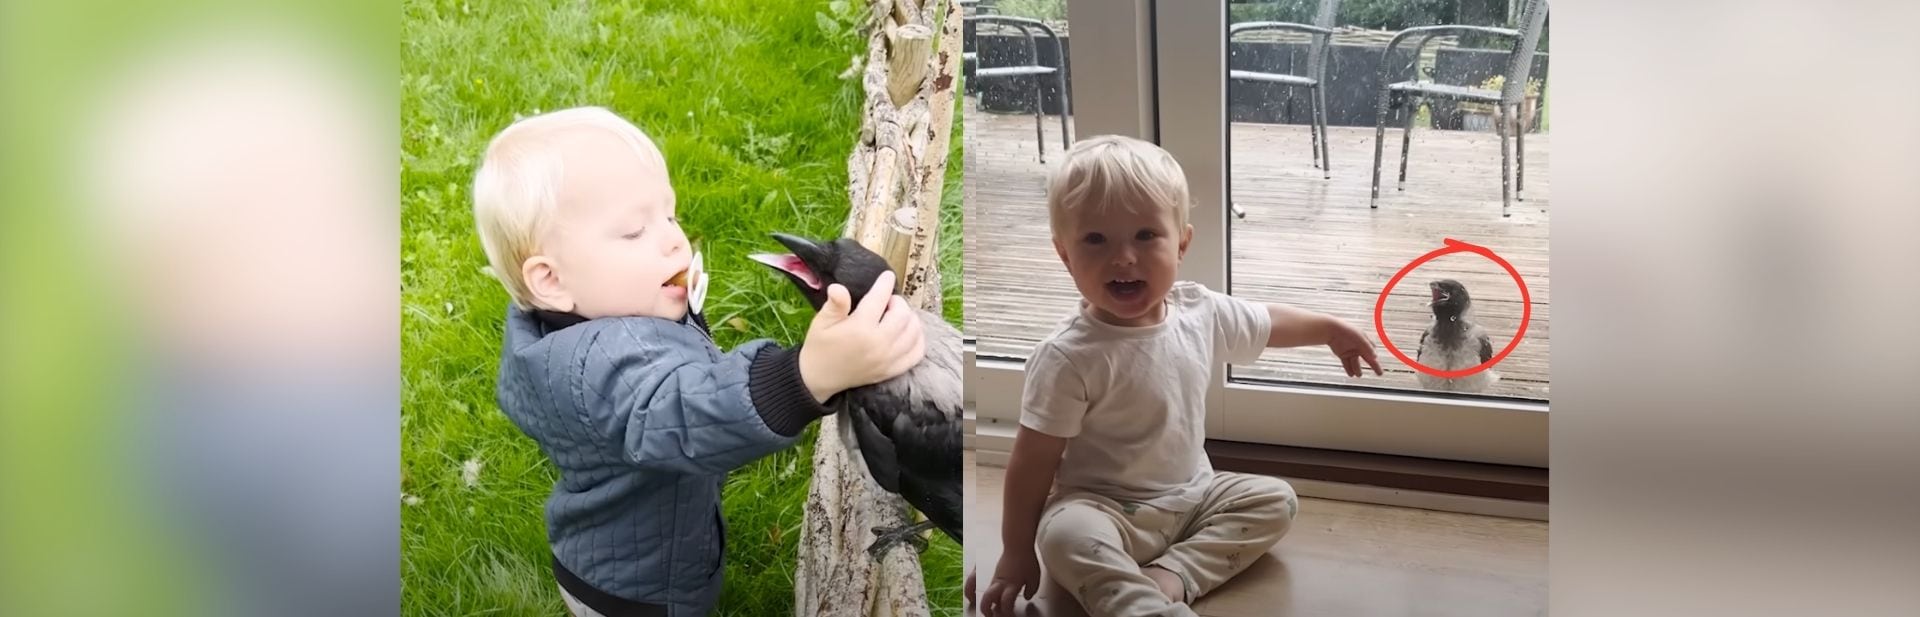 Playful Crow Adopts Danish Family As His Own And Forms A Special Bond